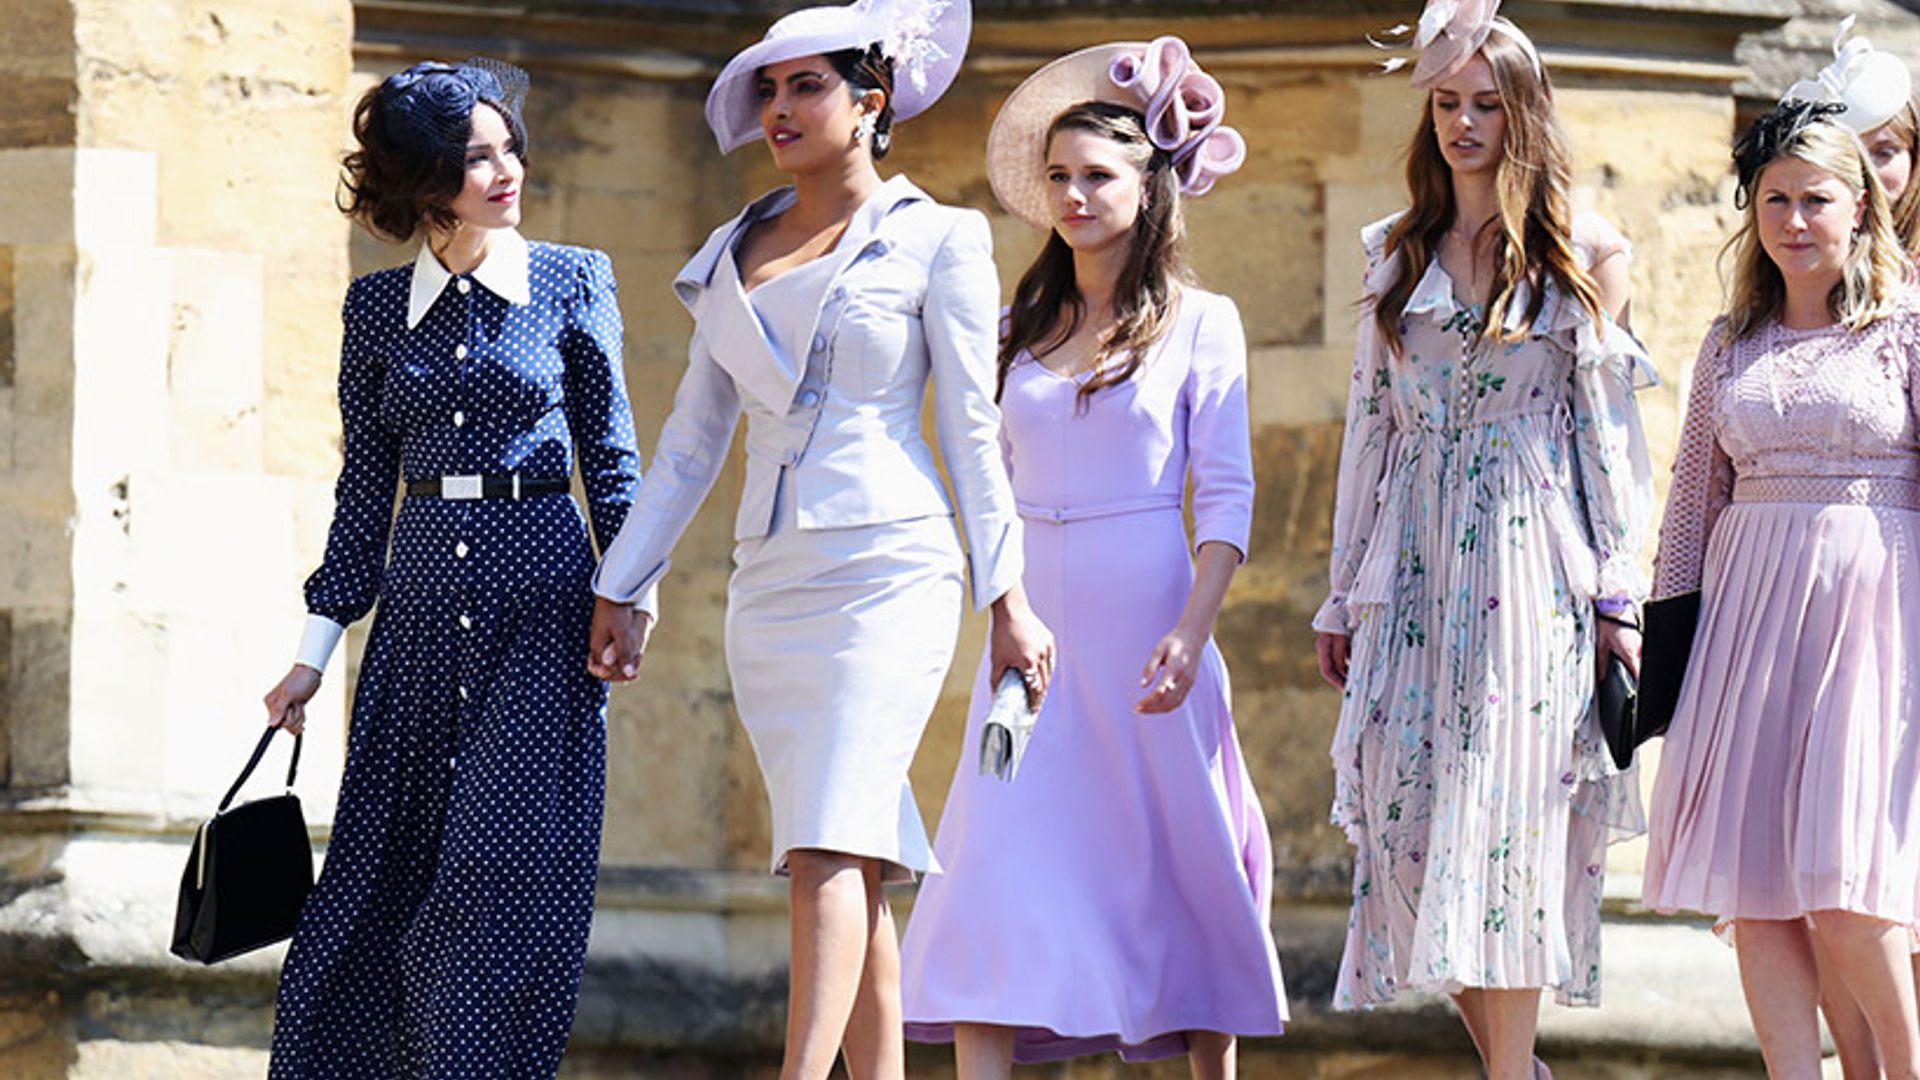 Awkward! THREE royal wedding guests wore the same dress (and Meghan has worn it, too!)